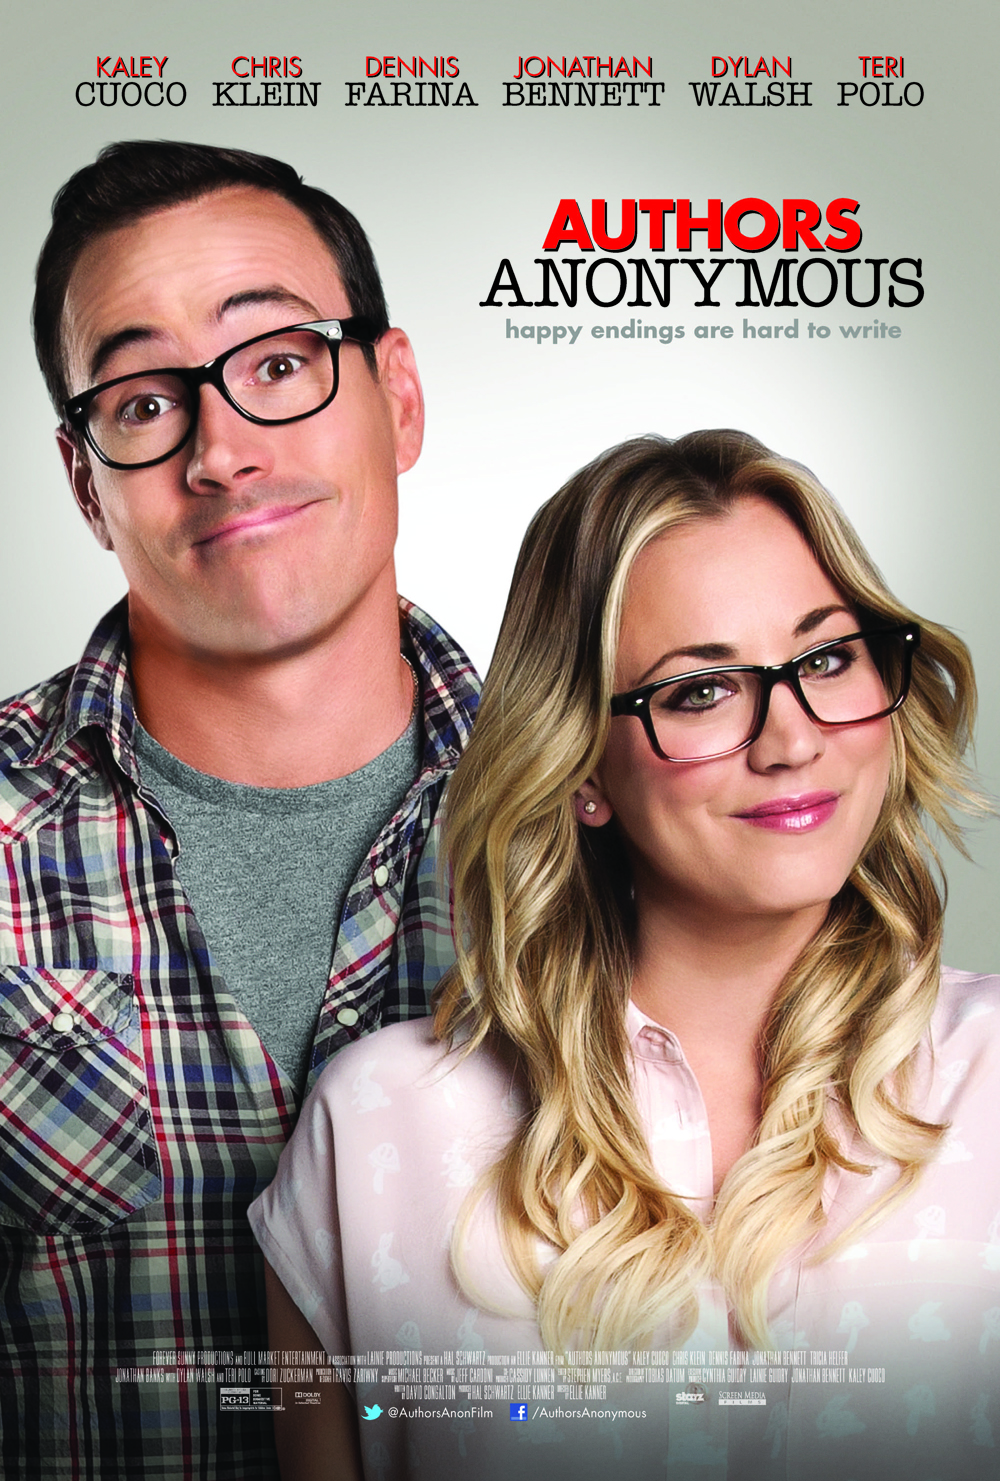 Chris Klein and Kaley Cuoco-Sweeting in Authors Anonymous (2014)